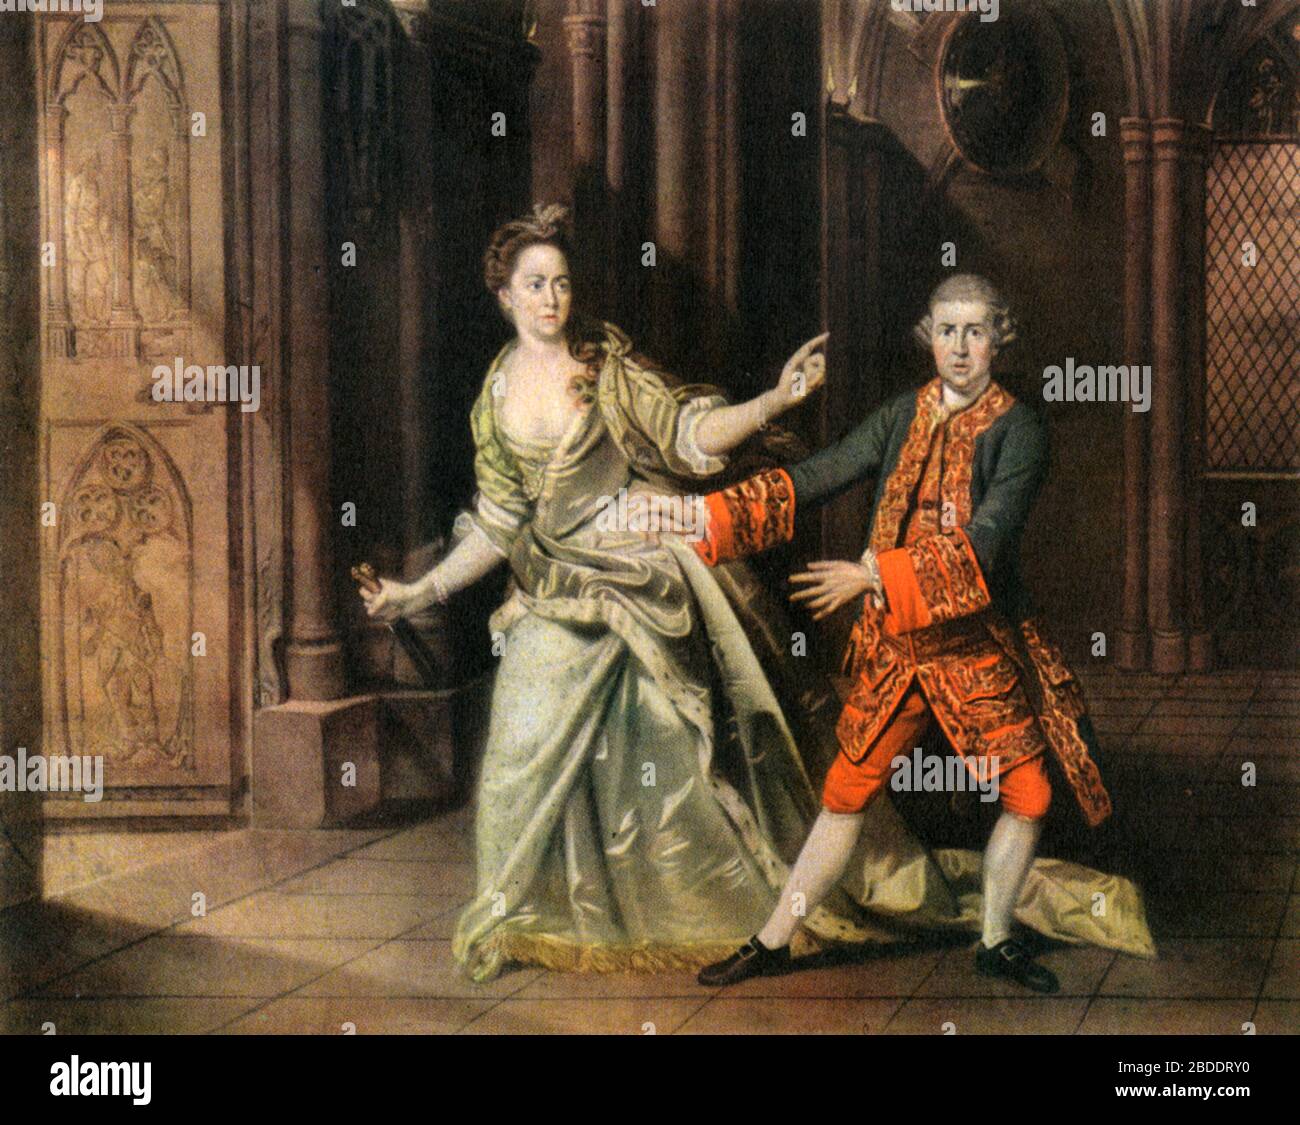 David Garrick and Mrs Pritchard as Macbeth and Lady Macbeth, 1762-3. By Johann Zoffany (1733-1810). David Garrick (1717-1779) influential, 18th centuary, English actor, playwright, theatre manager and producer. Here pictured with English actress Hannah Pritchard (1711-1768). Stock Photo